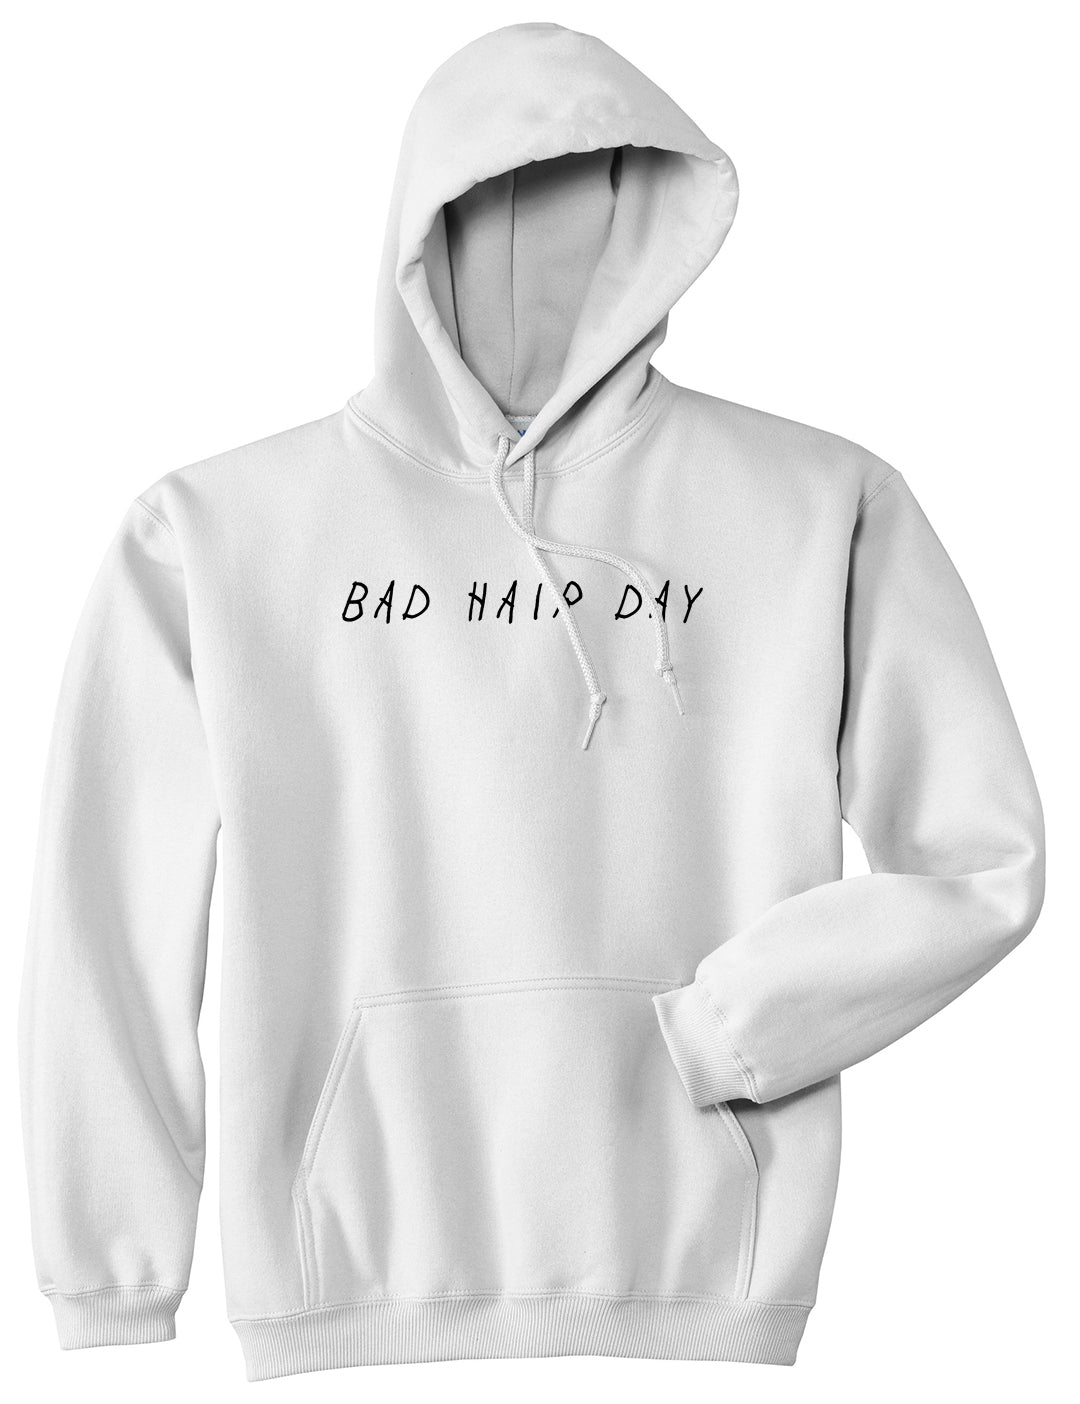 Bad Hair Day White Pullover Hoodie by Kings Of NY